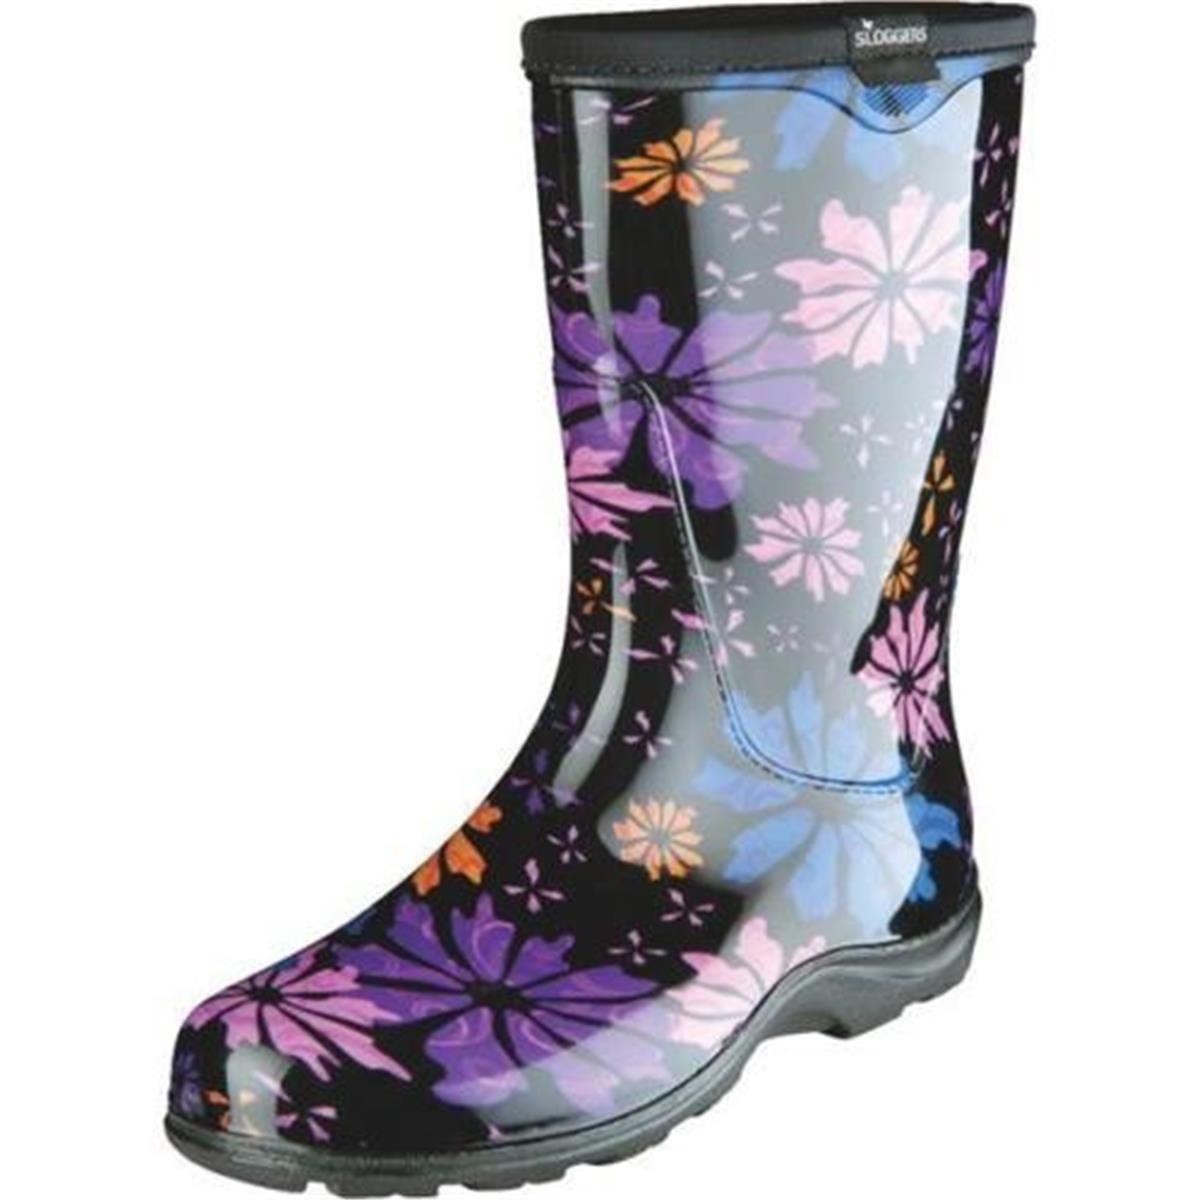 Picture of BFG2 PPL5016FP07 7 in. Sloggers Womens Boot with Trim Flower Power Print